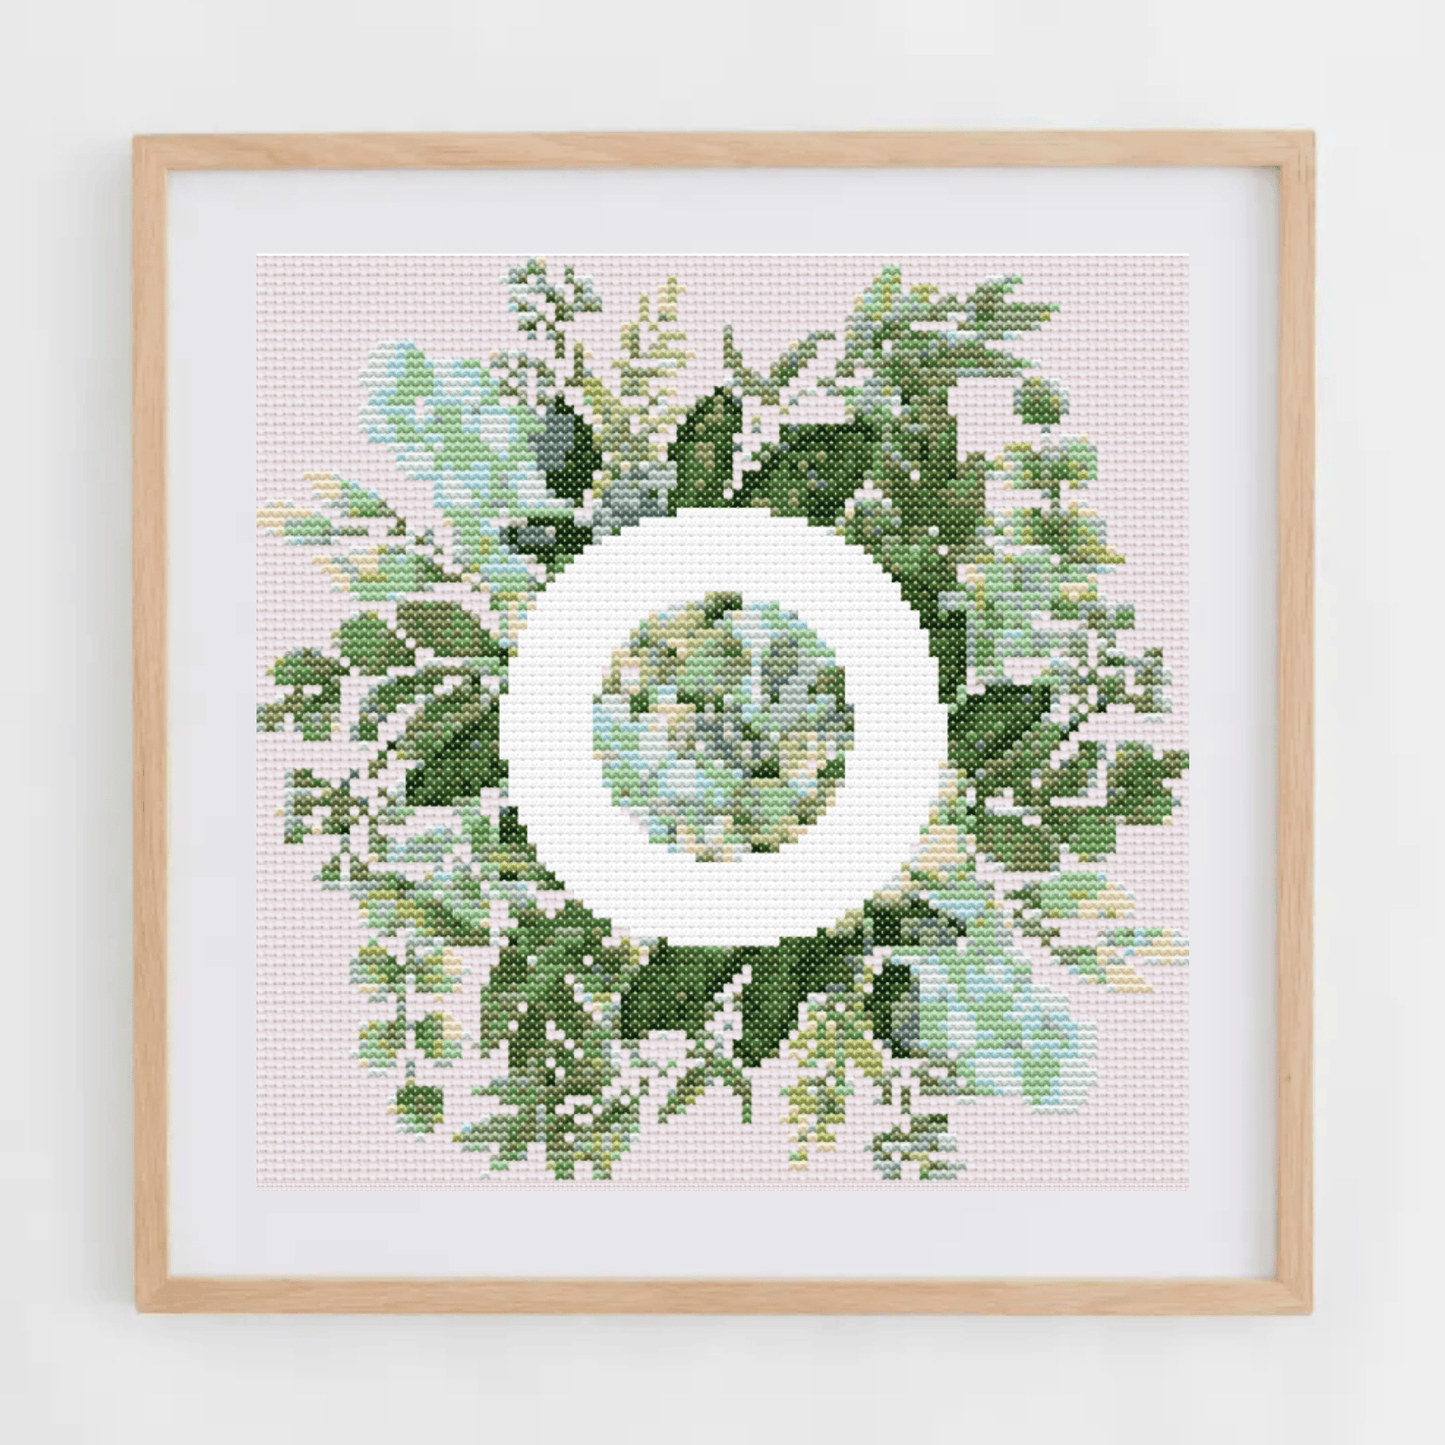 Monogram Cross-Stitch Pattern With Green Bouquet | Initial Cross Stitch Chart With Flowers and Leaves | Cross Stitch PDF